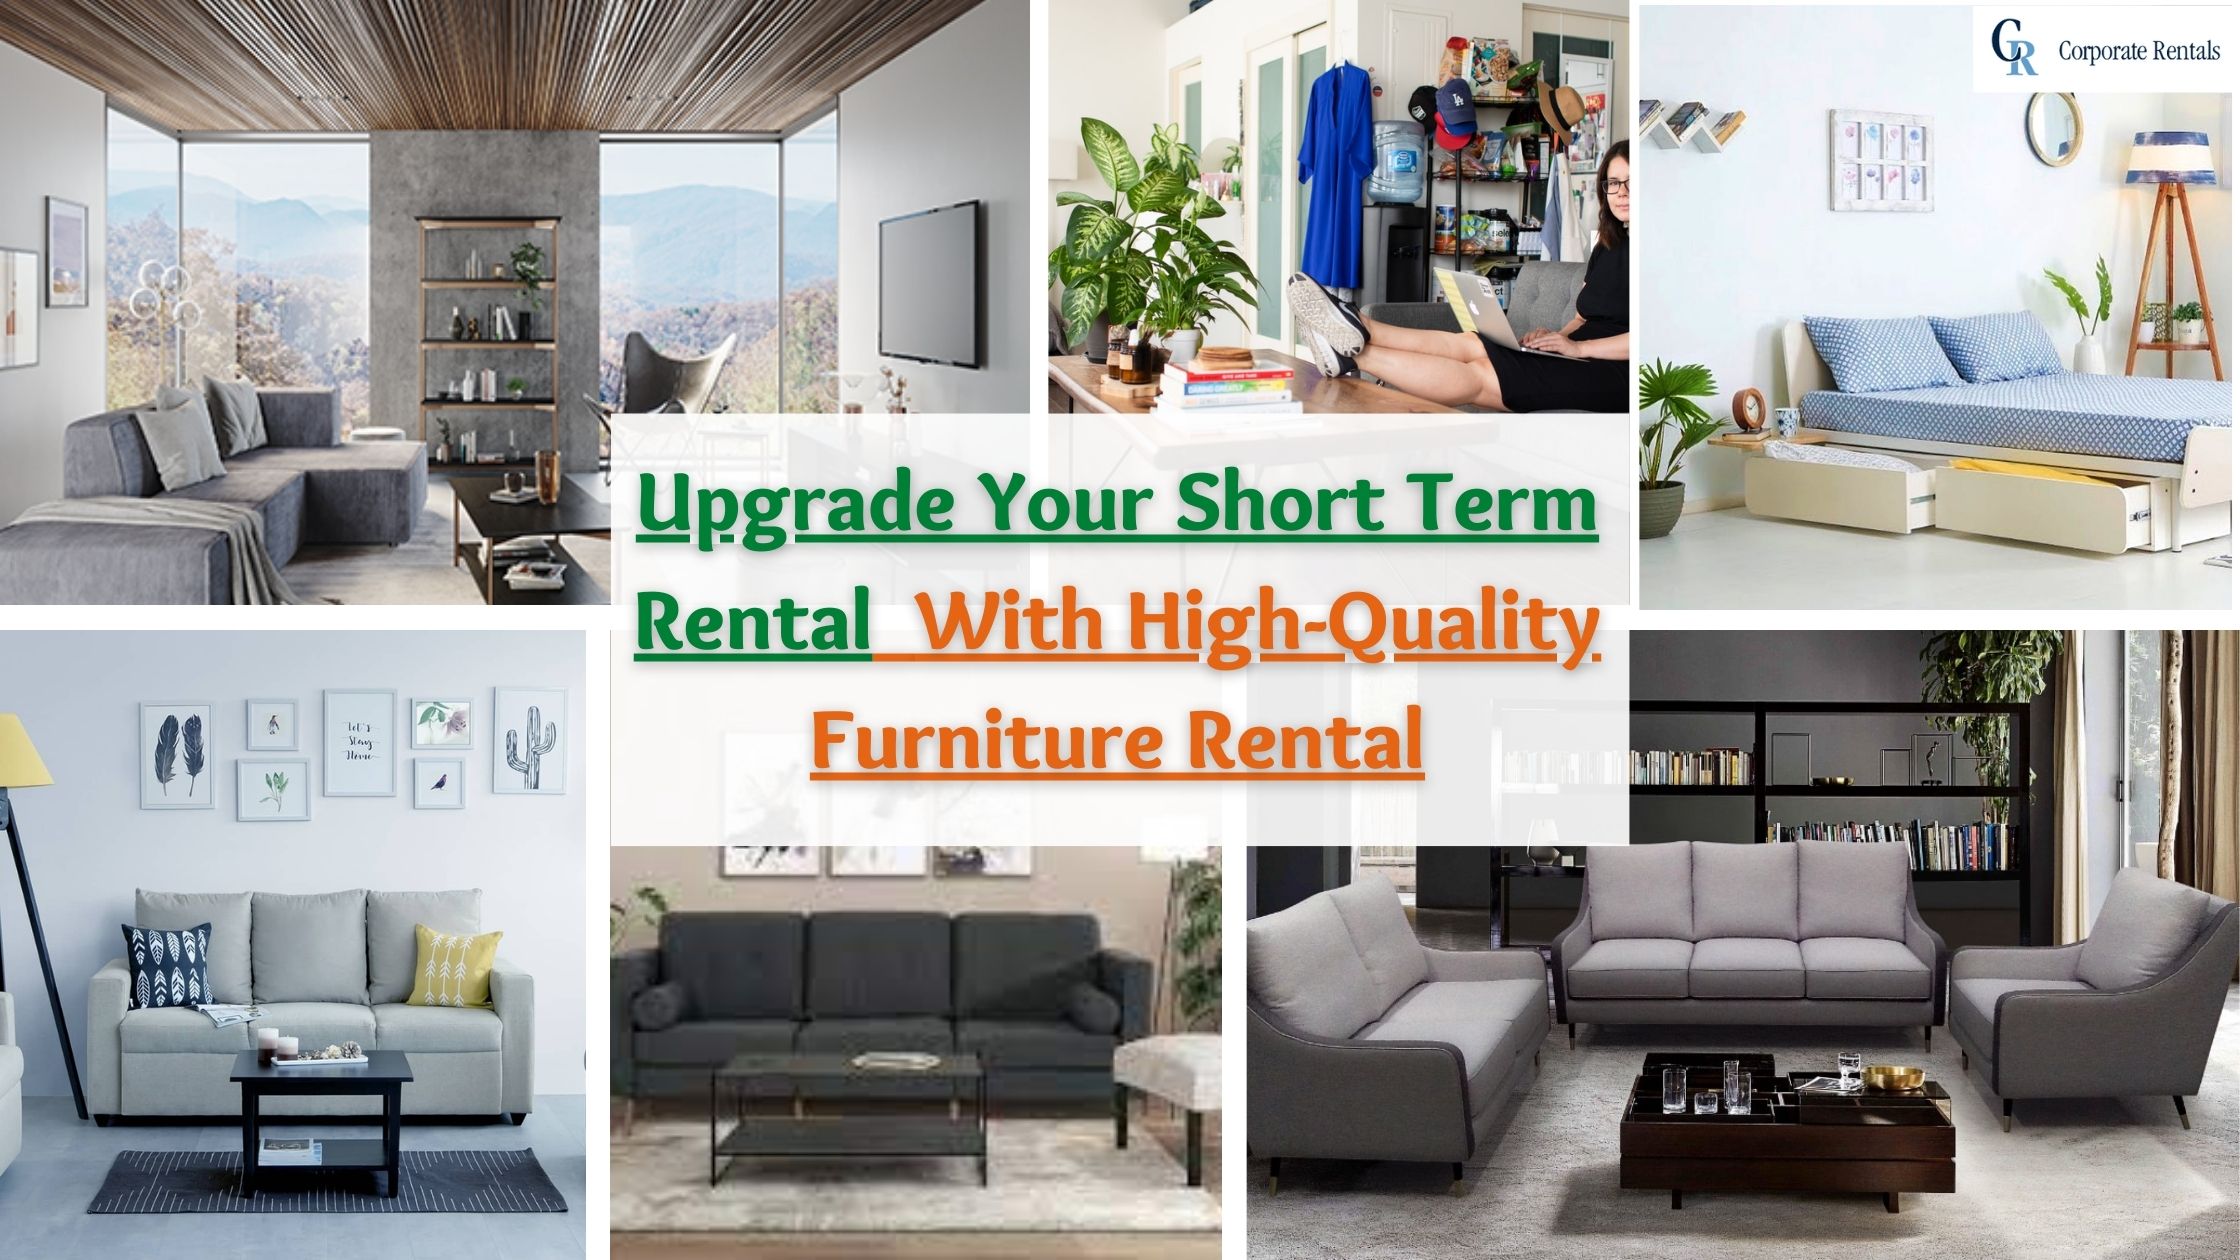 Upgrade Your Short Term Rental With High-Quality Rental Furniture